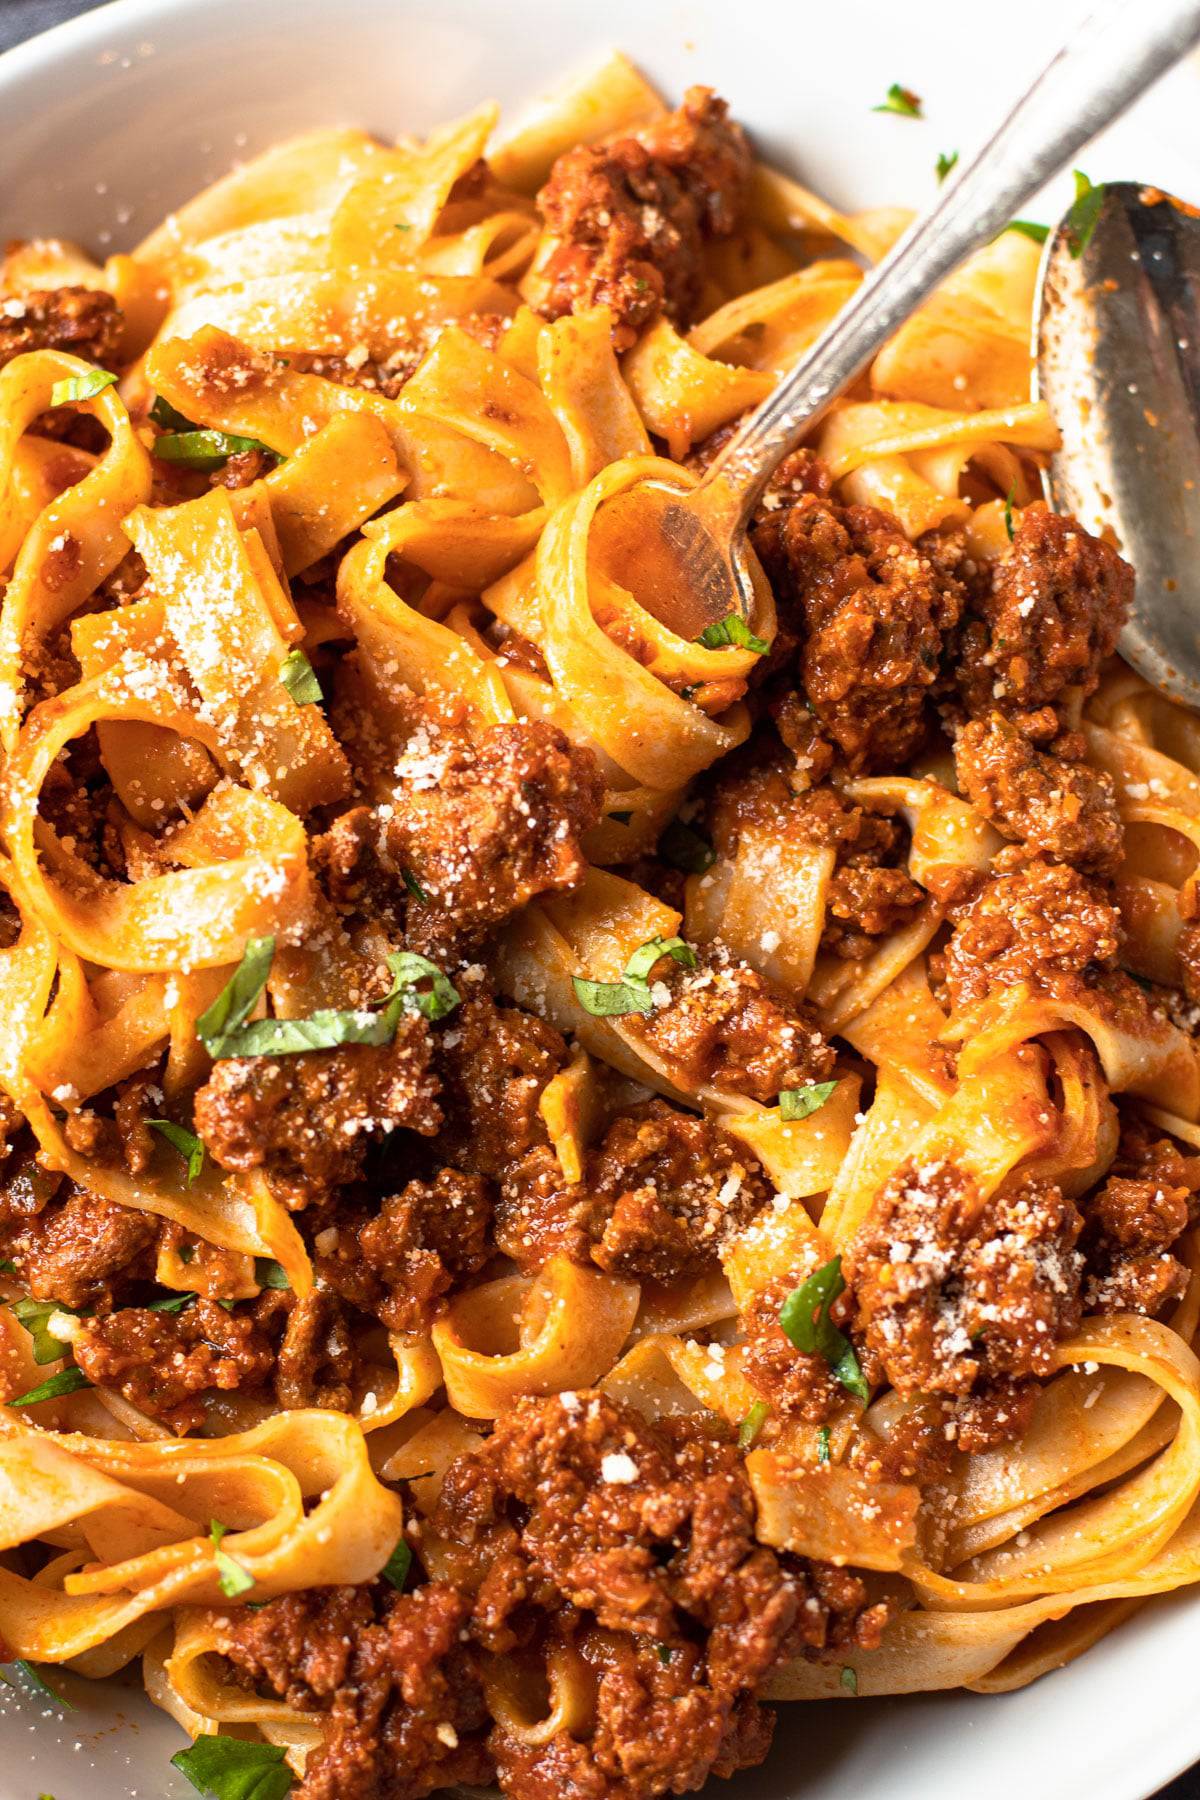 Turkey bolognese with fresh pasta.